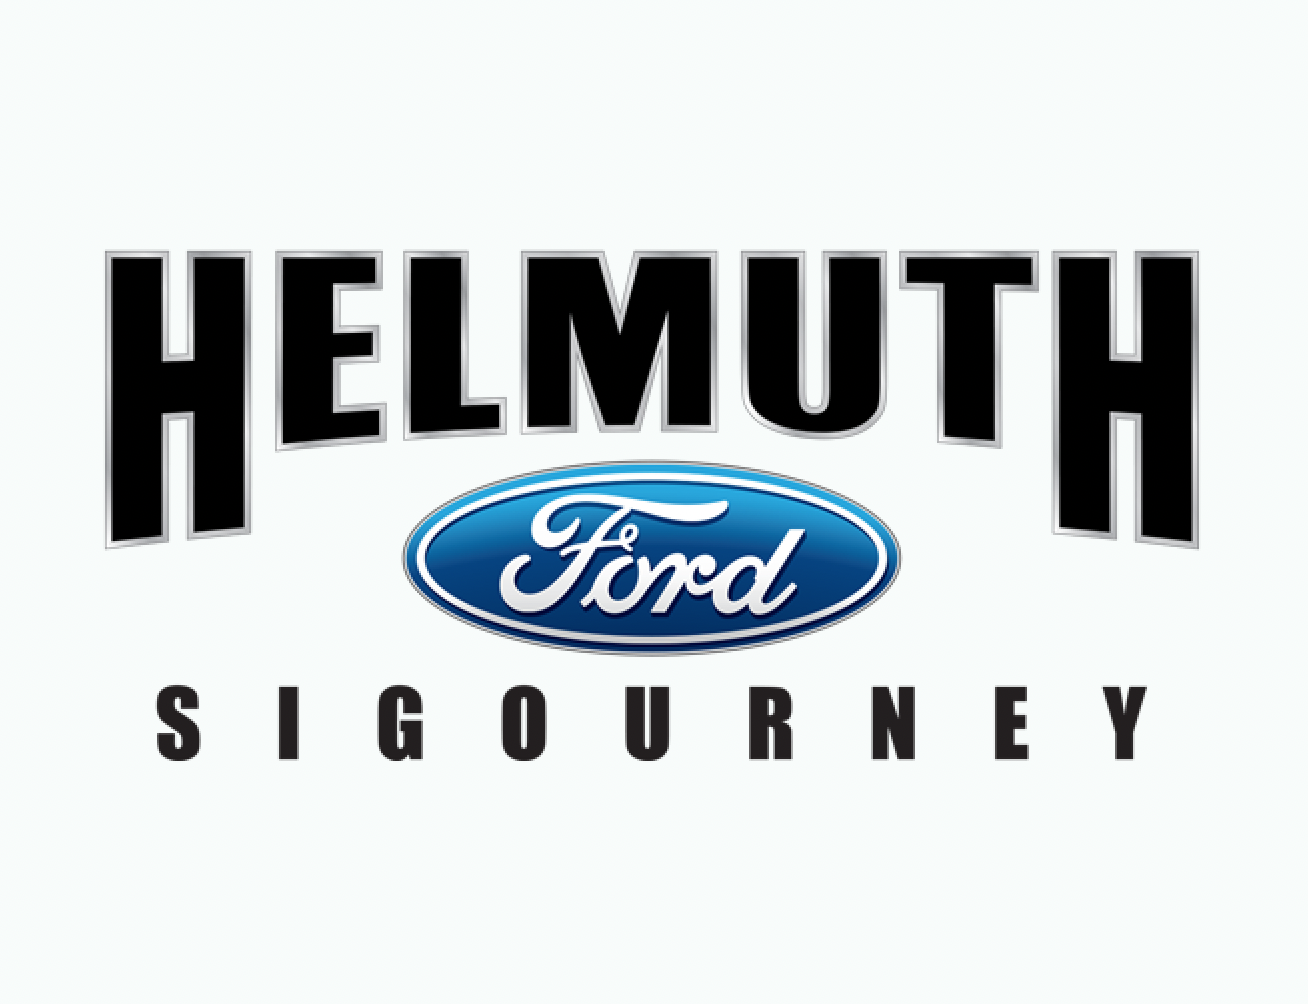 Helmuth Ford